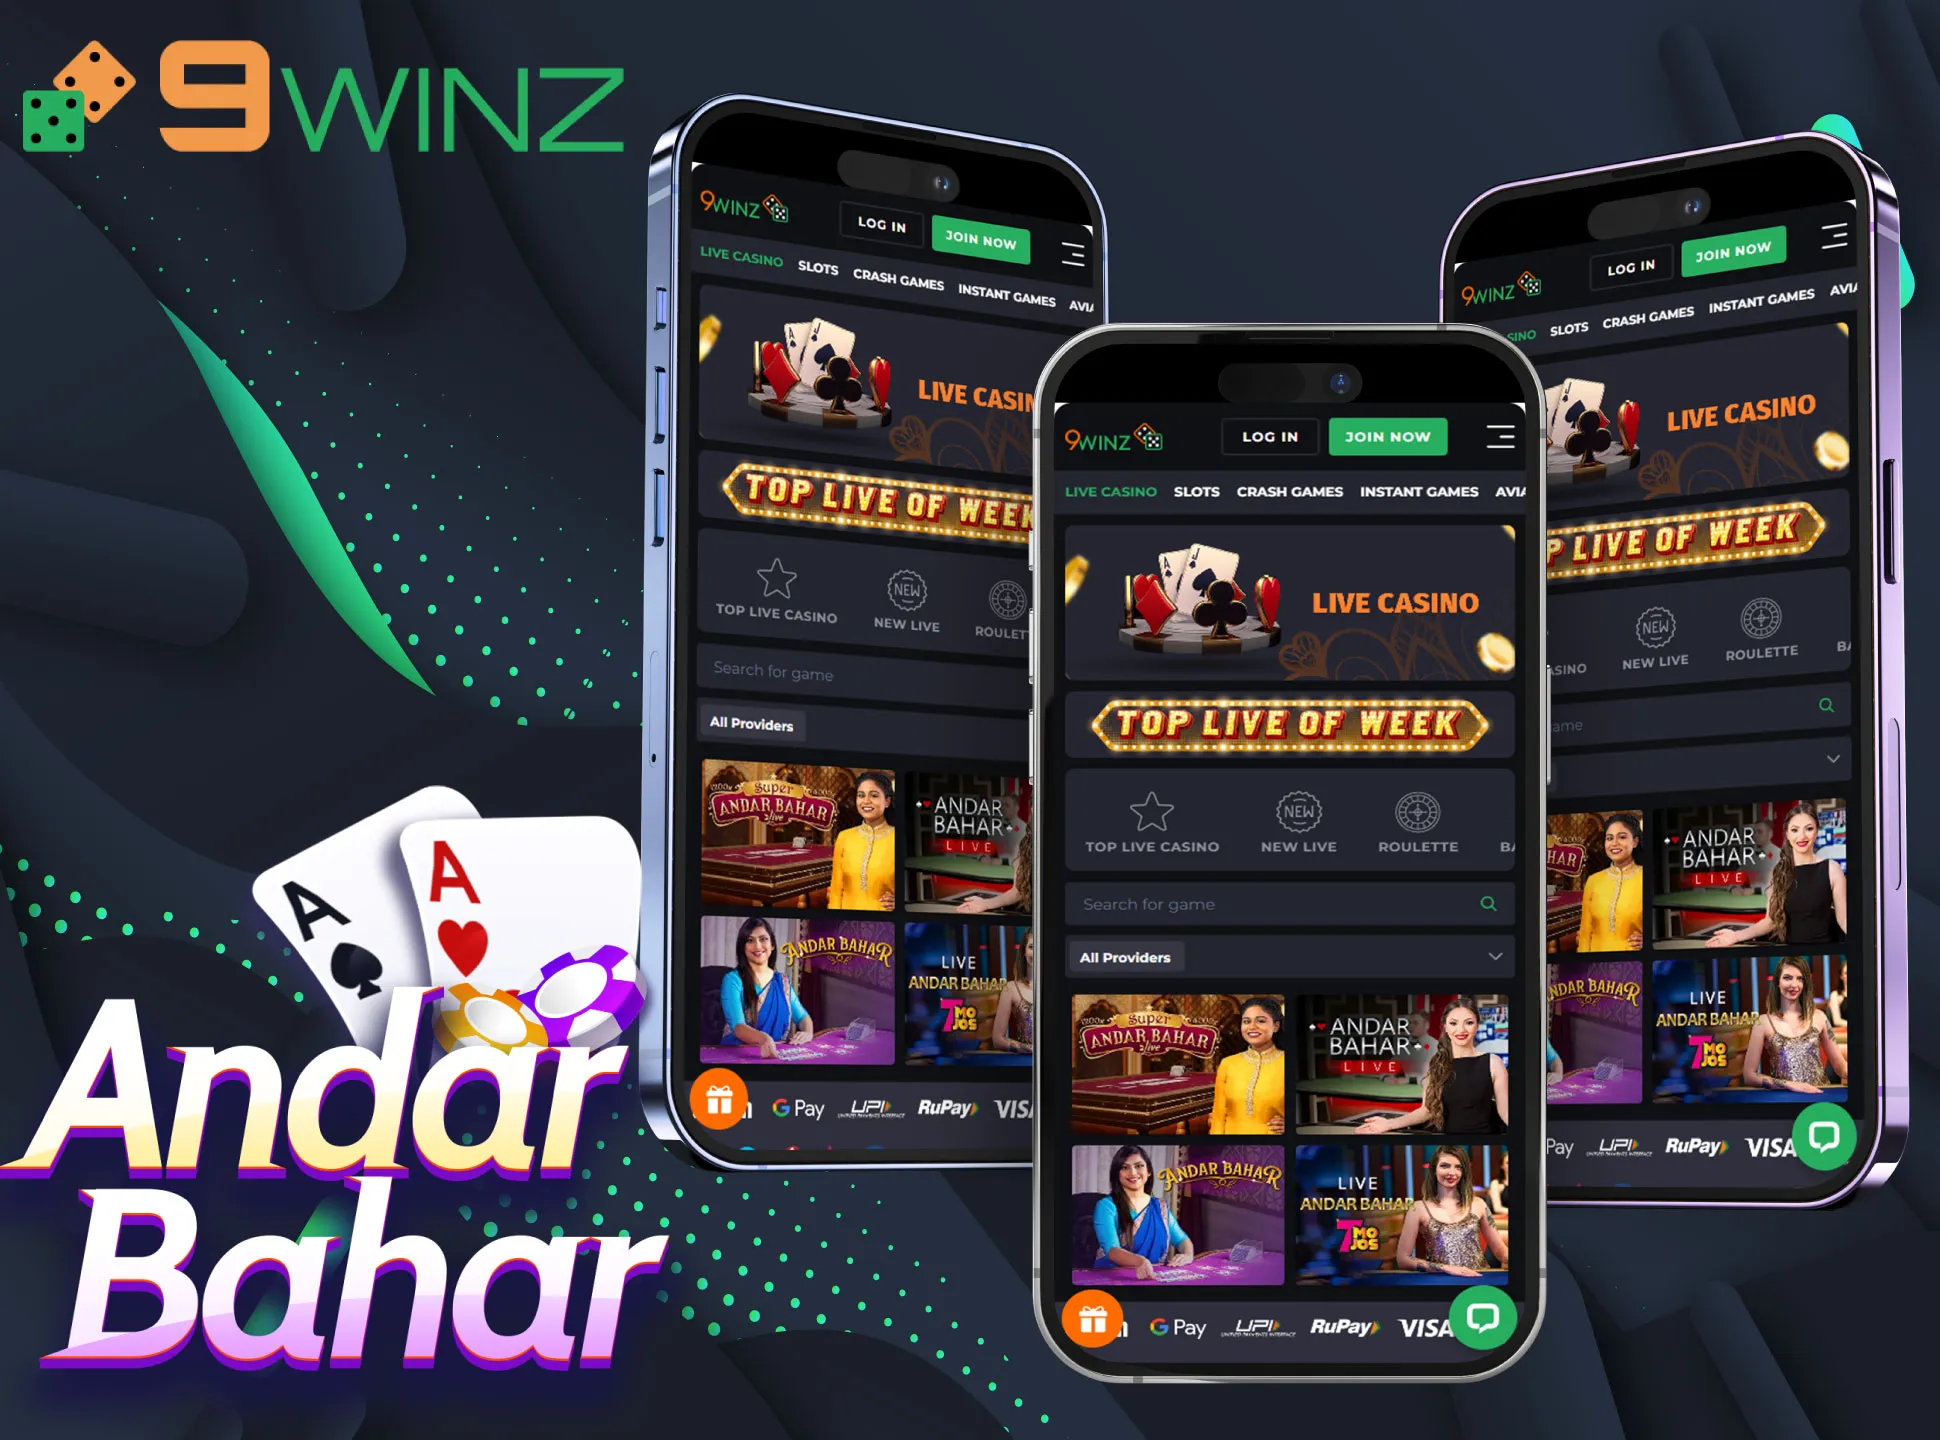 Play Andar Bahar in the 9winz mobile casino.